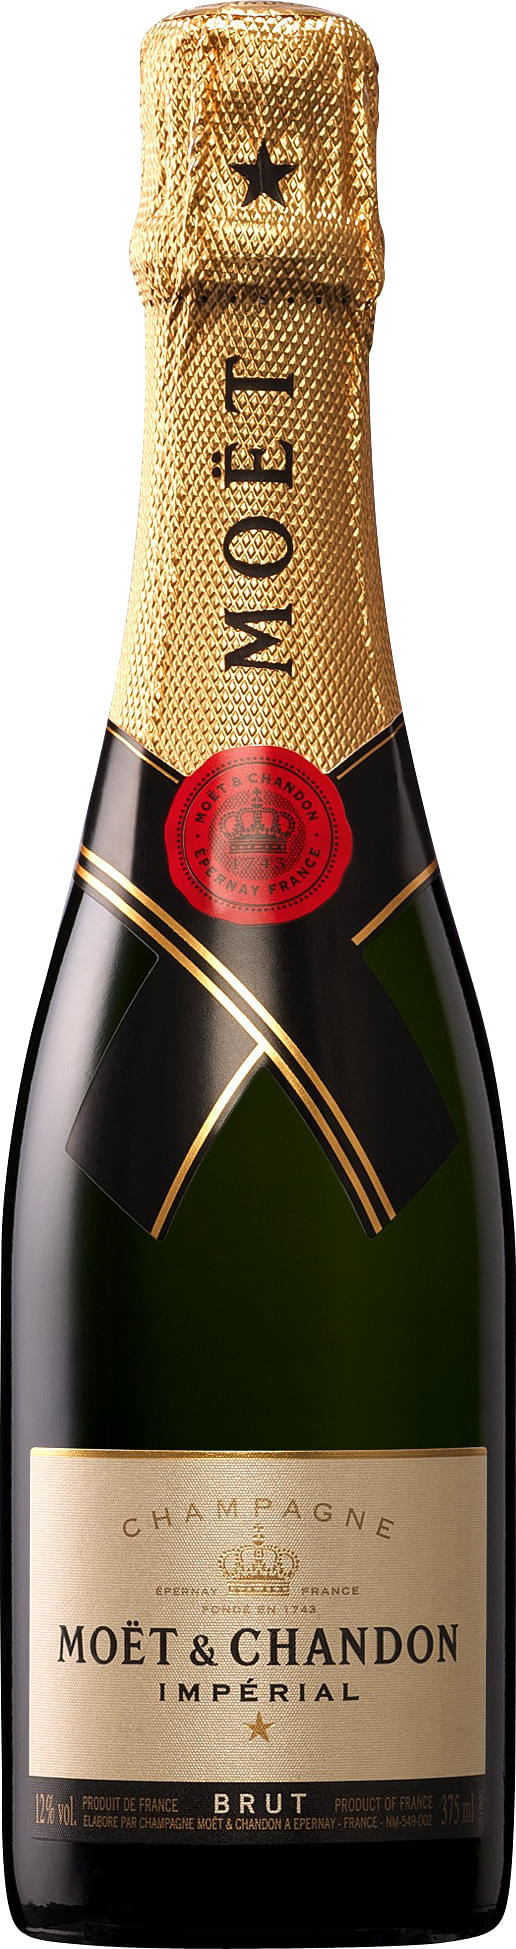 Moet and Chandon Brut Imperial NV Champagne